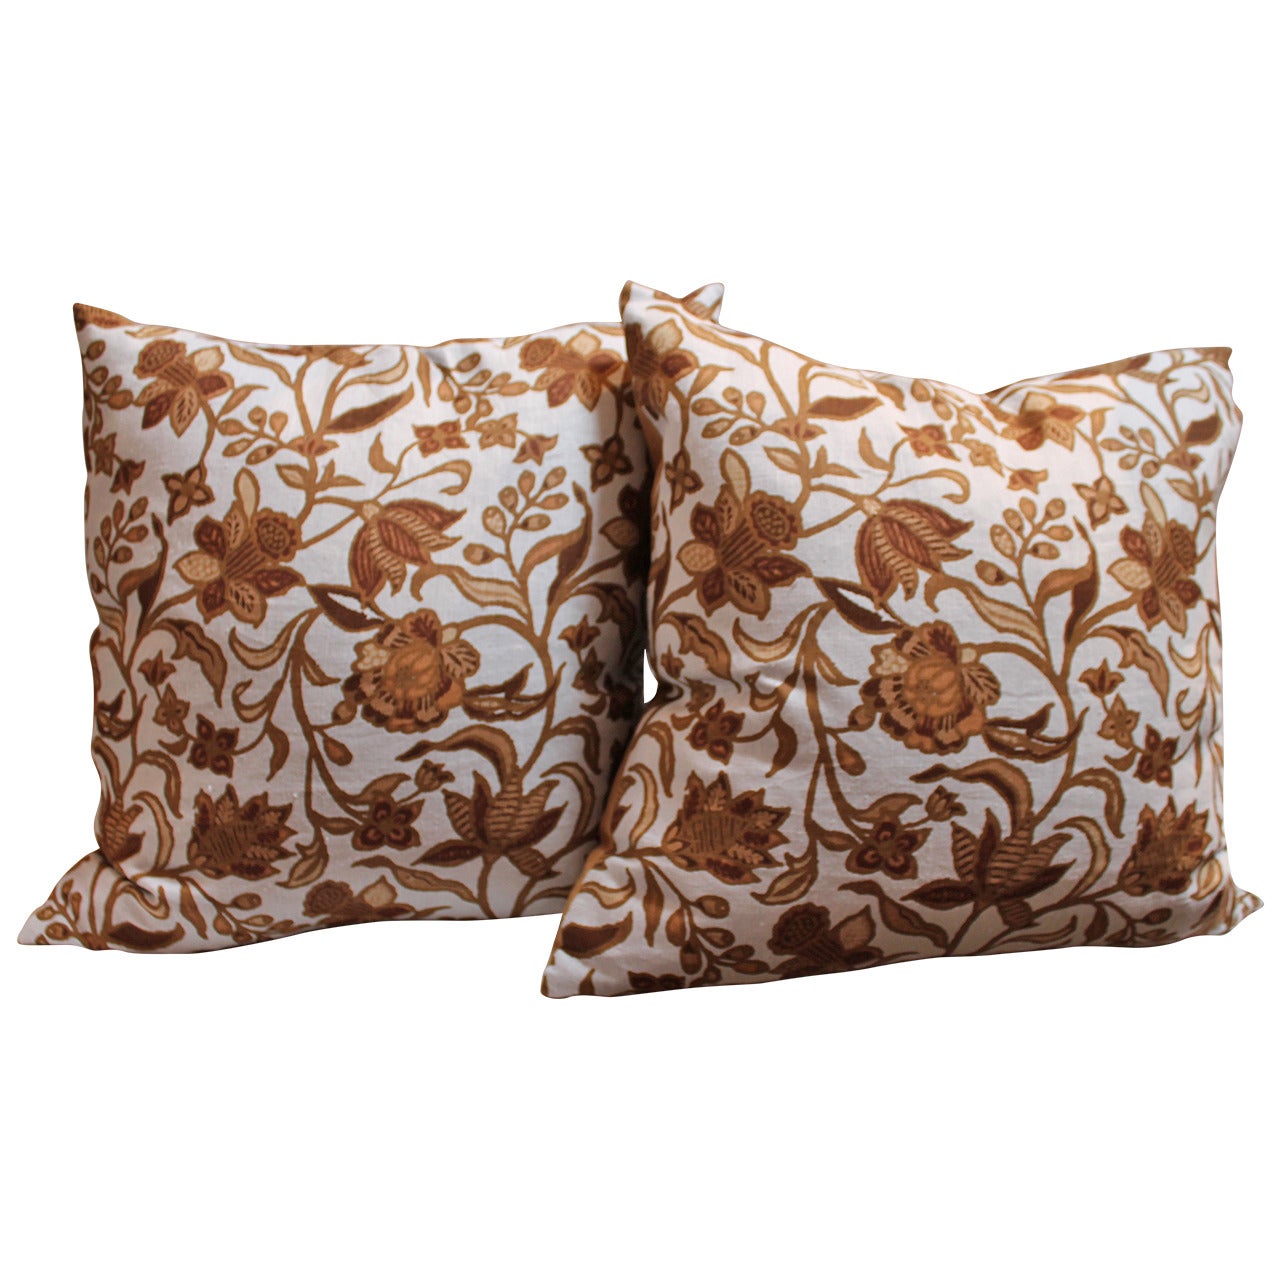 Pair of Stenciled on Linen Pillows